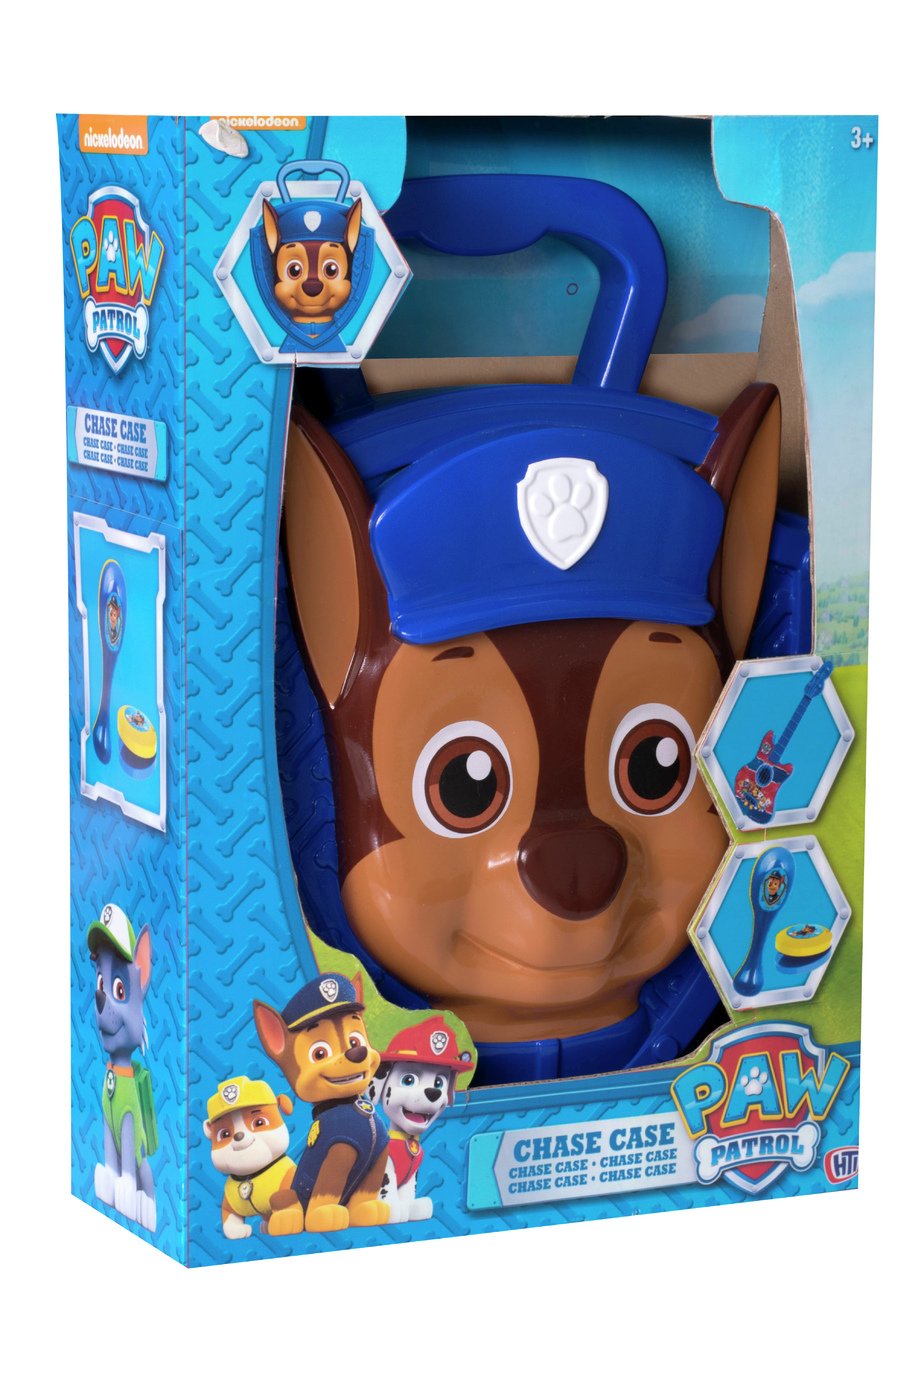 PAW Patrol Chase Case Review